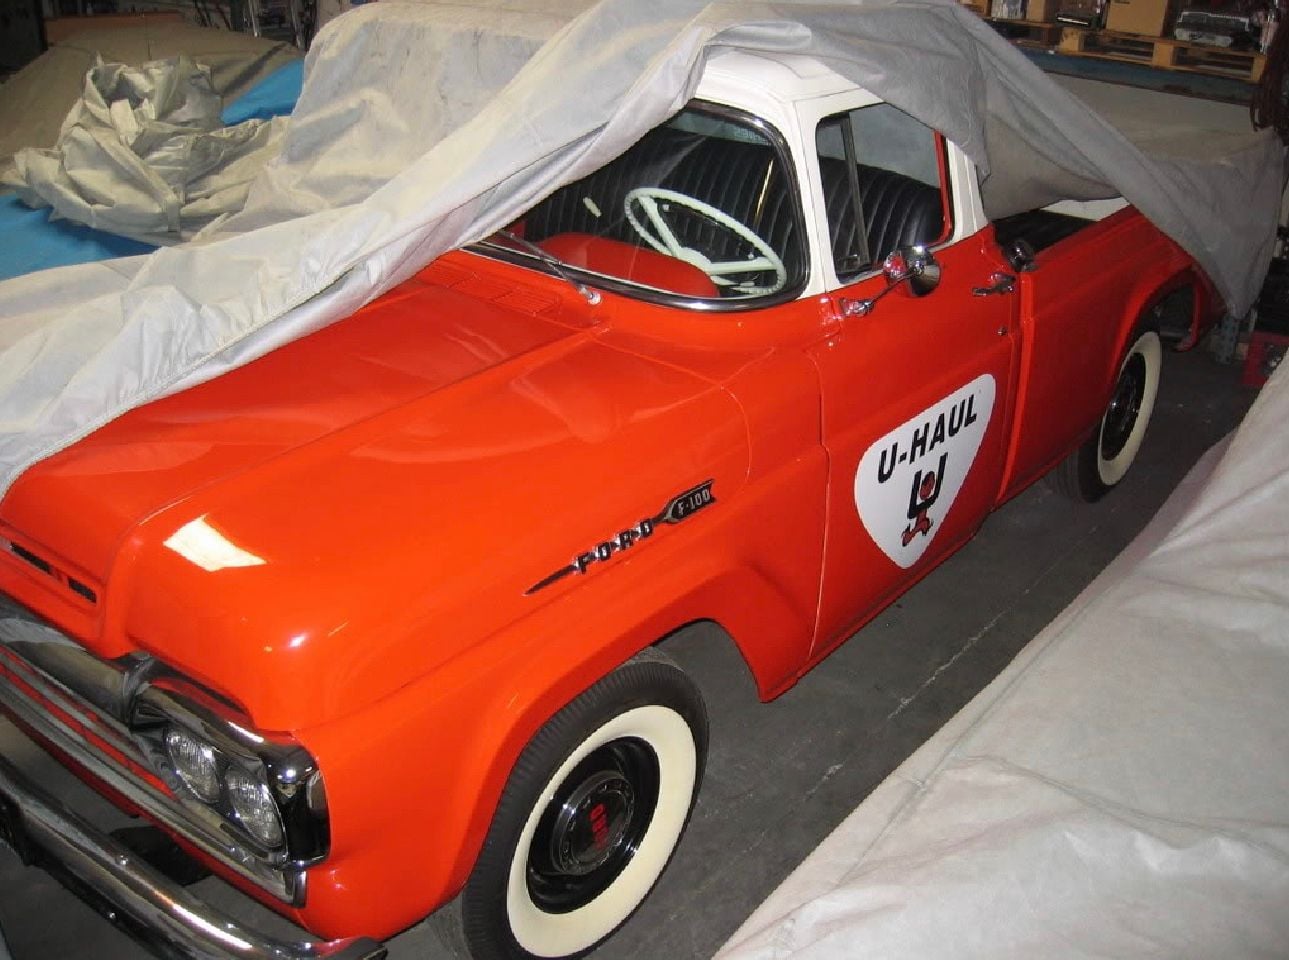 U Haul F100 Page 2 Ford Truck Enthusiasts Forums